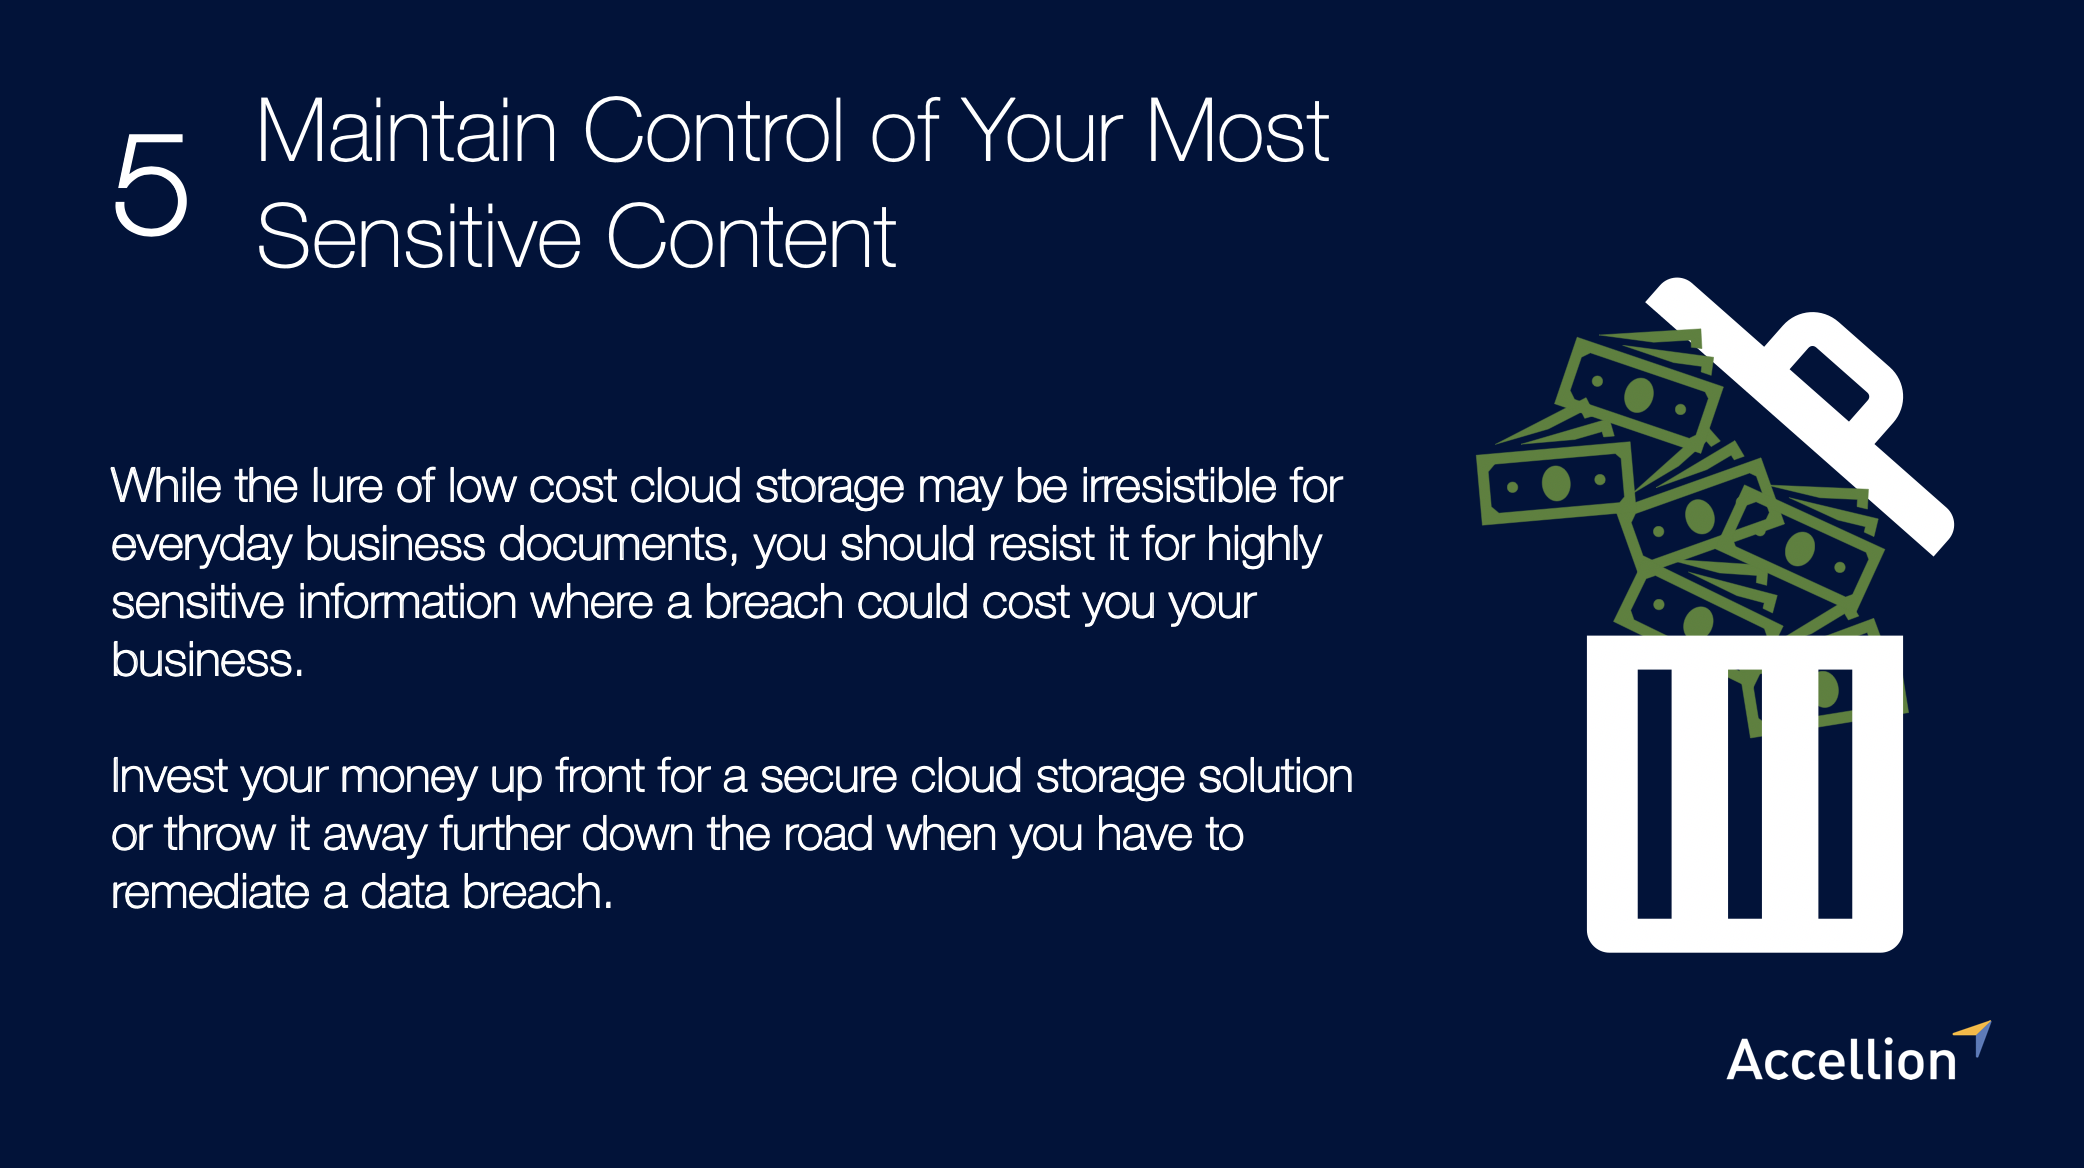 Invest money in secure cloud storage now, or throw it away later